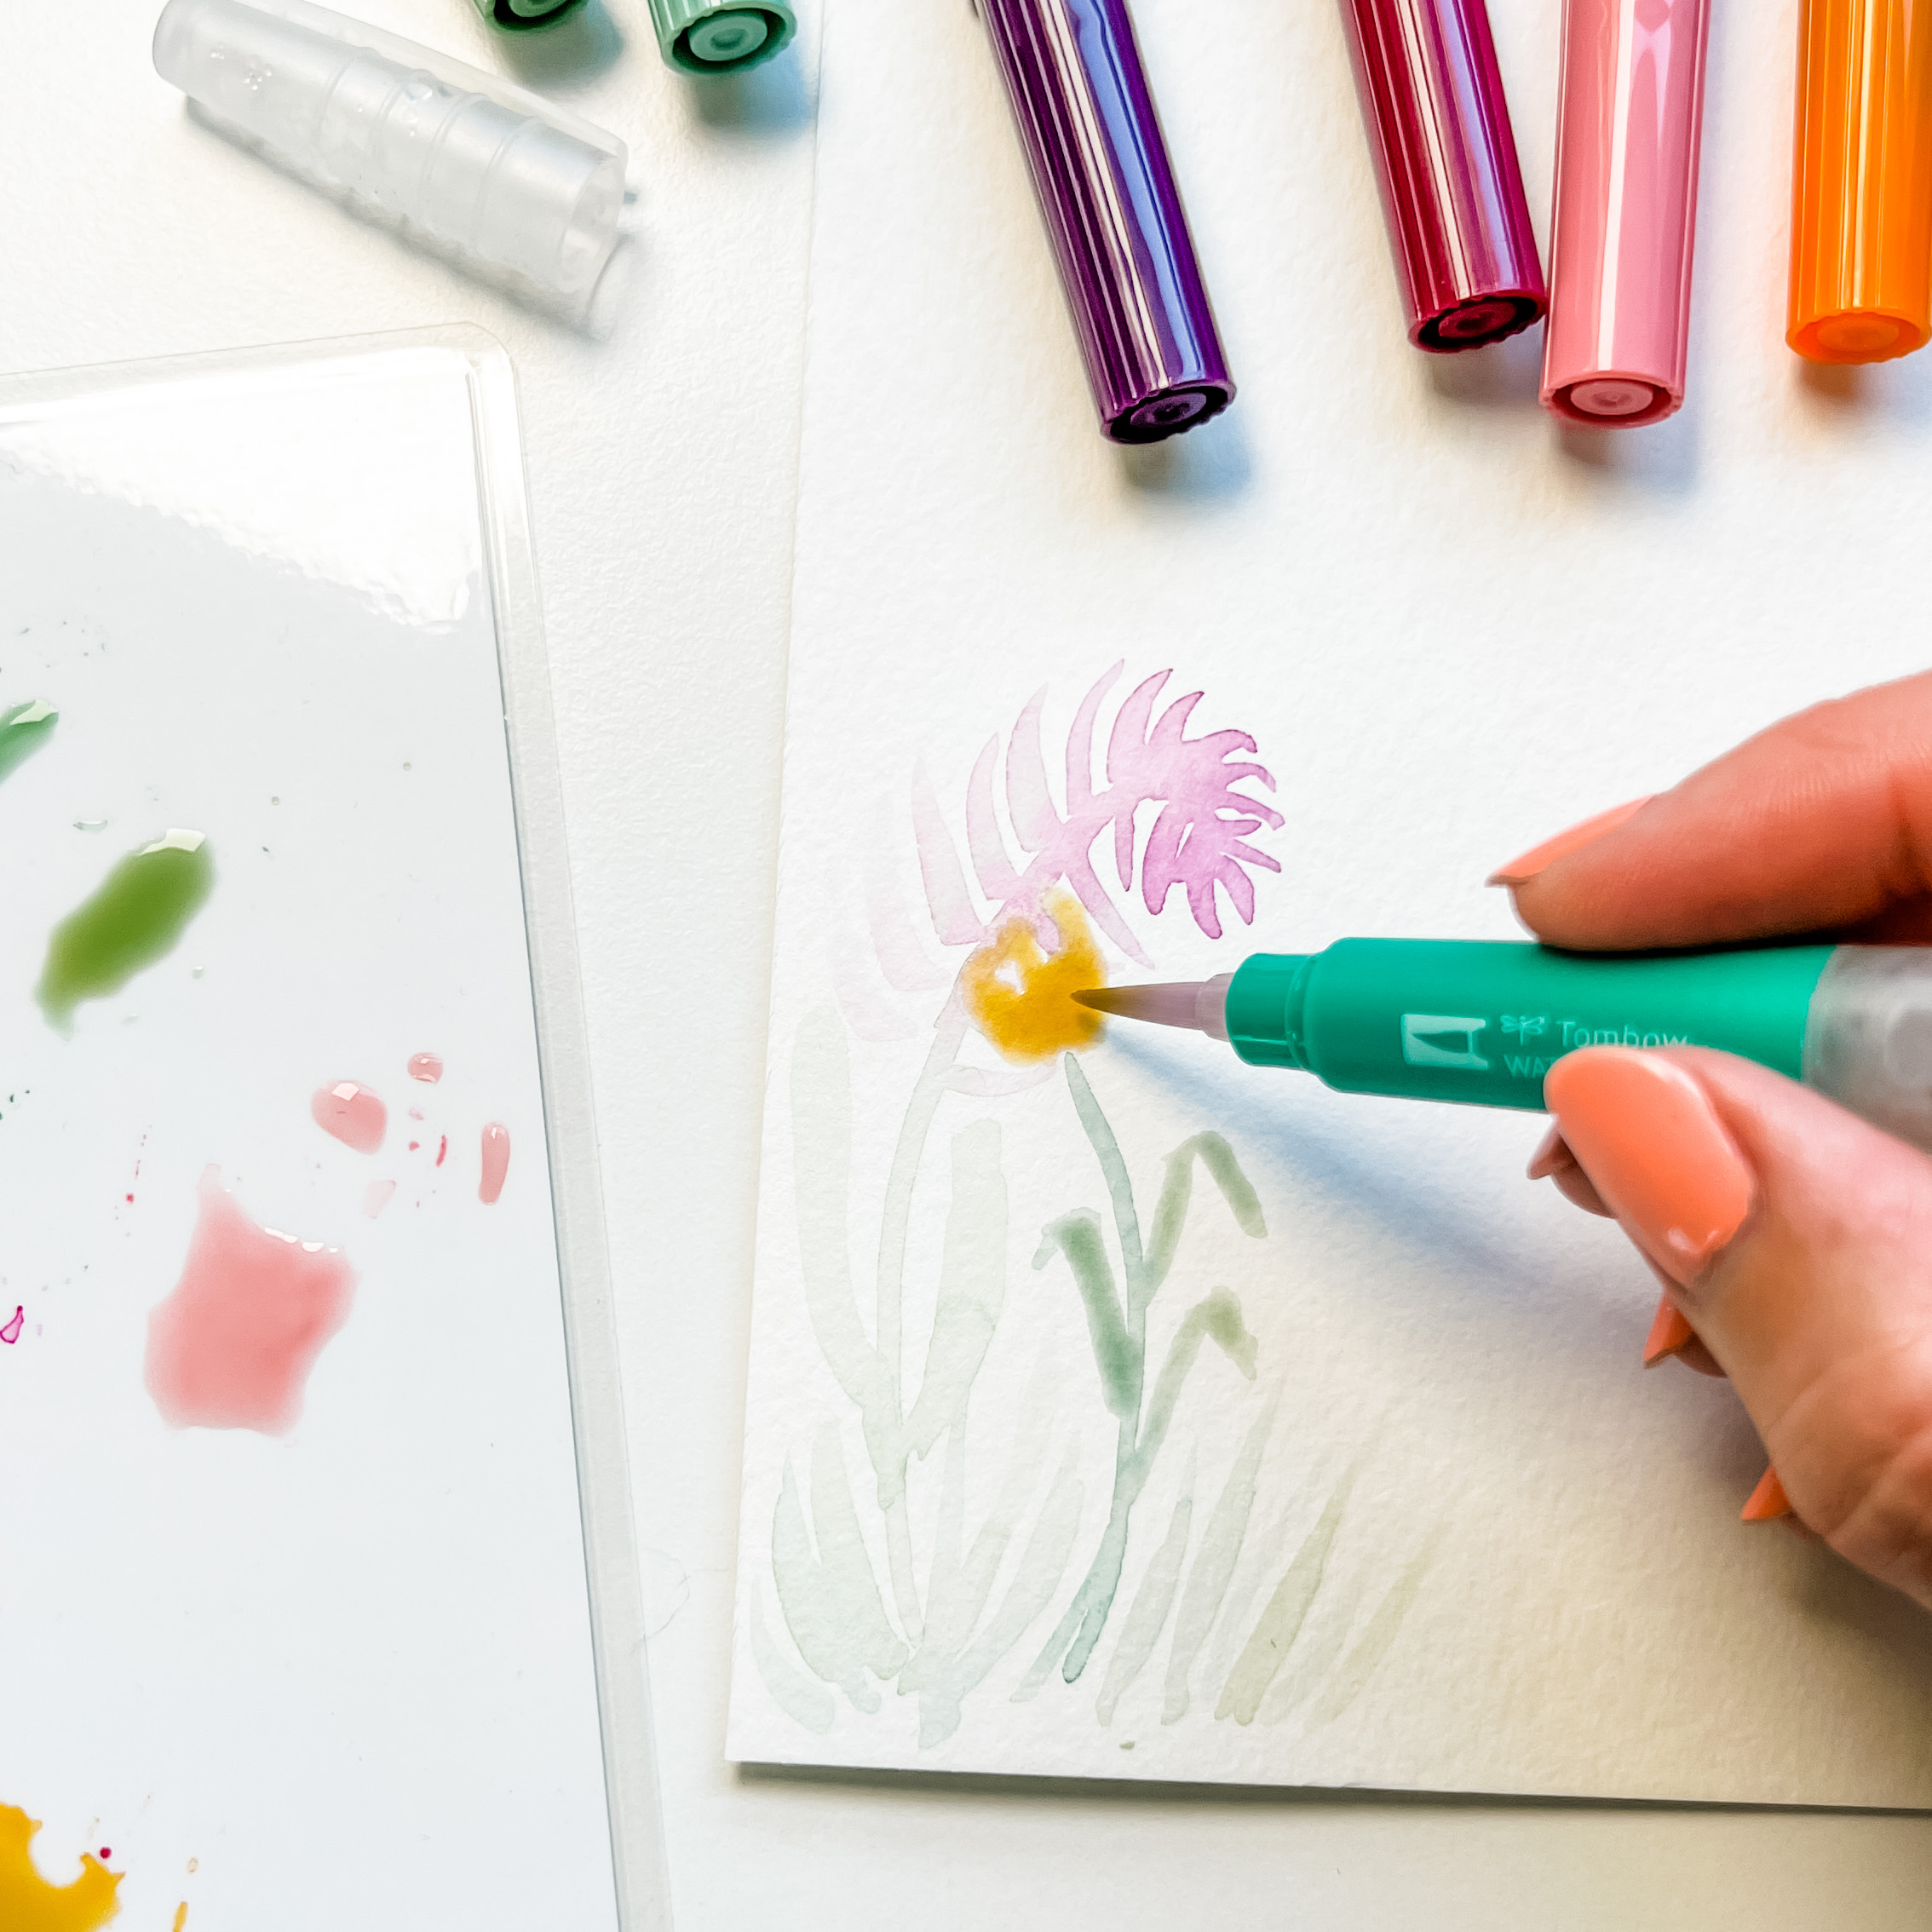 Paint a Wildflower Card with Dual Brush Pens by Jessica Mack on behalf of Tombow